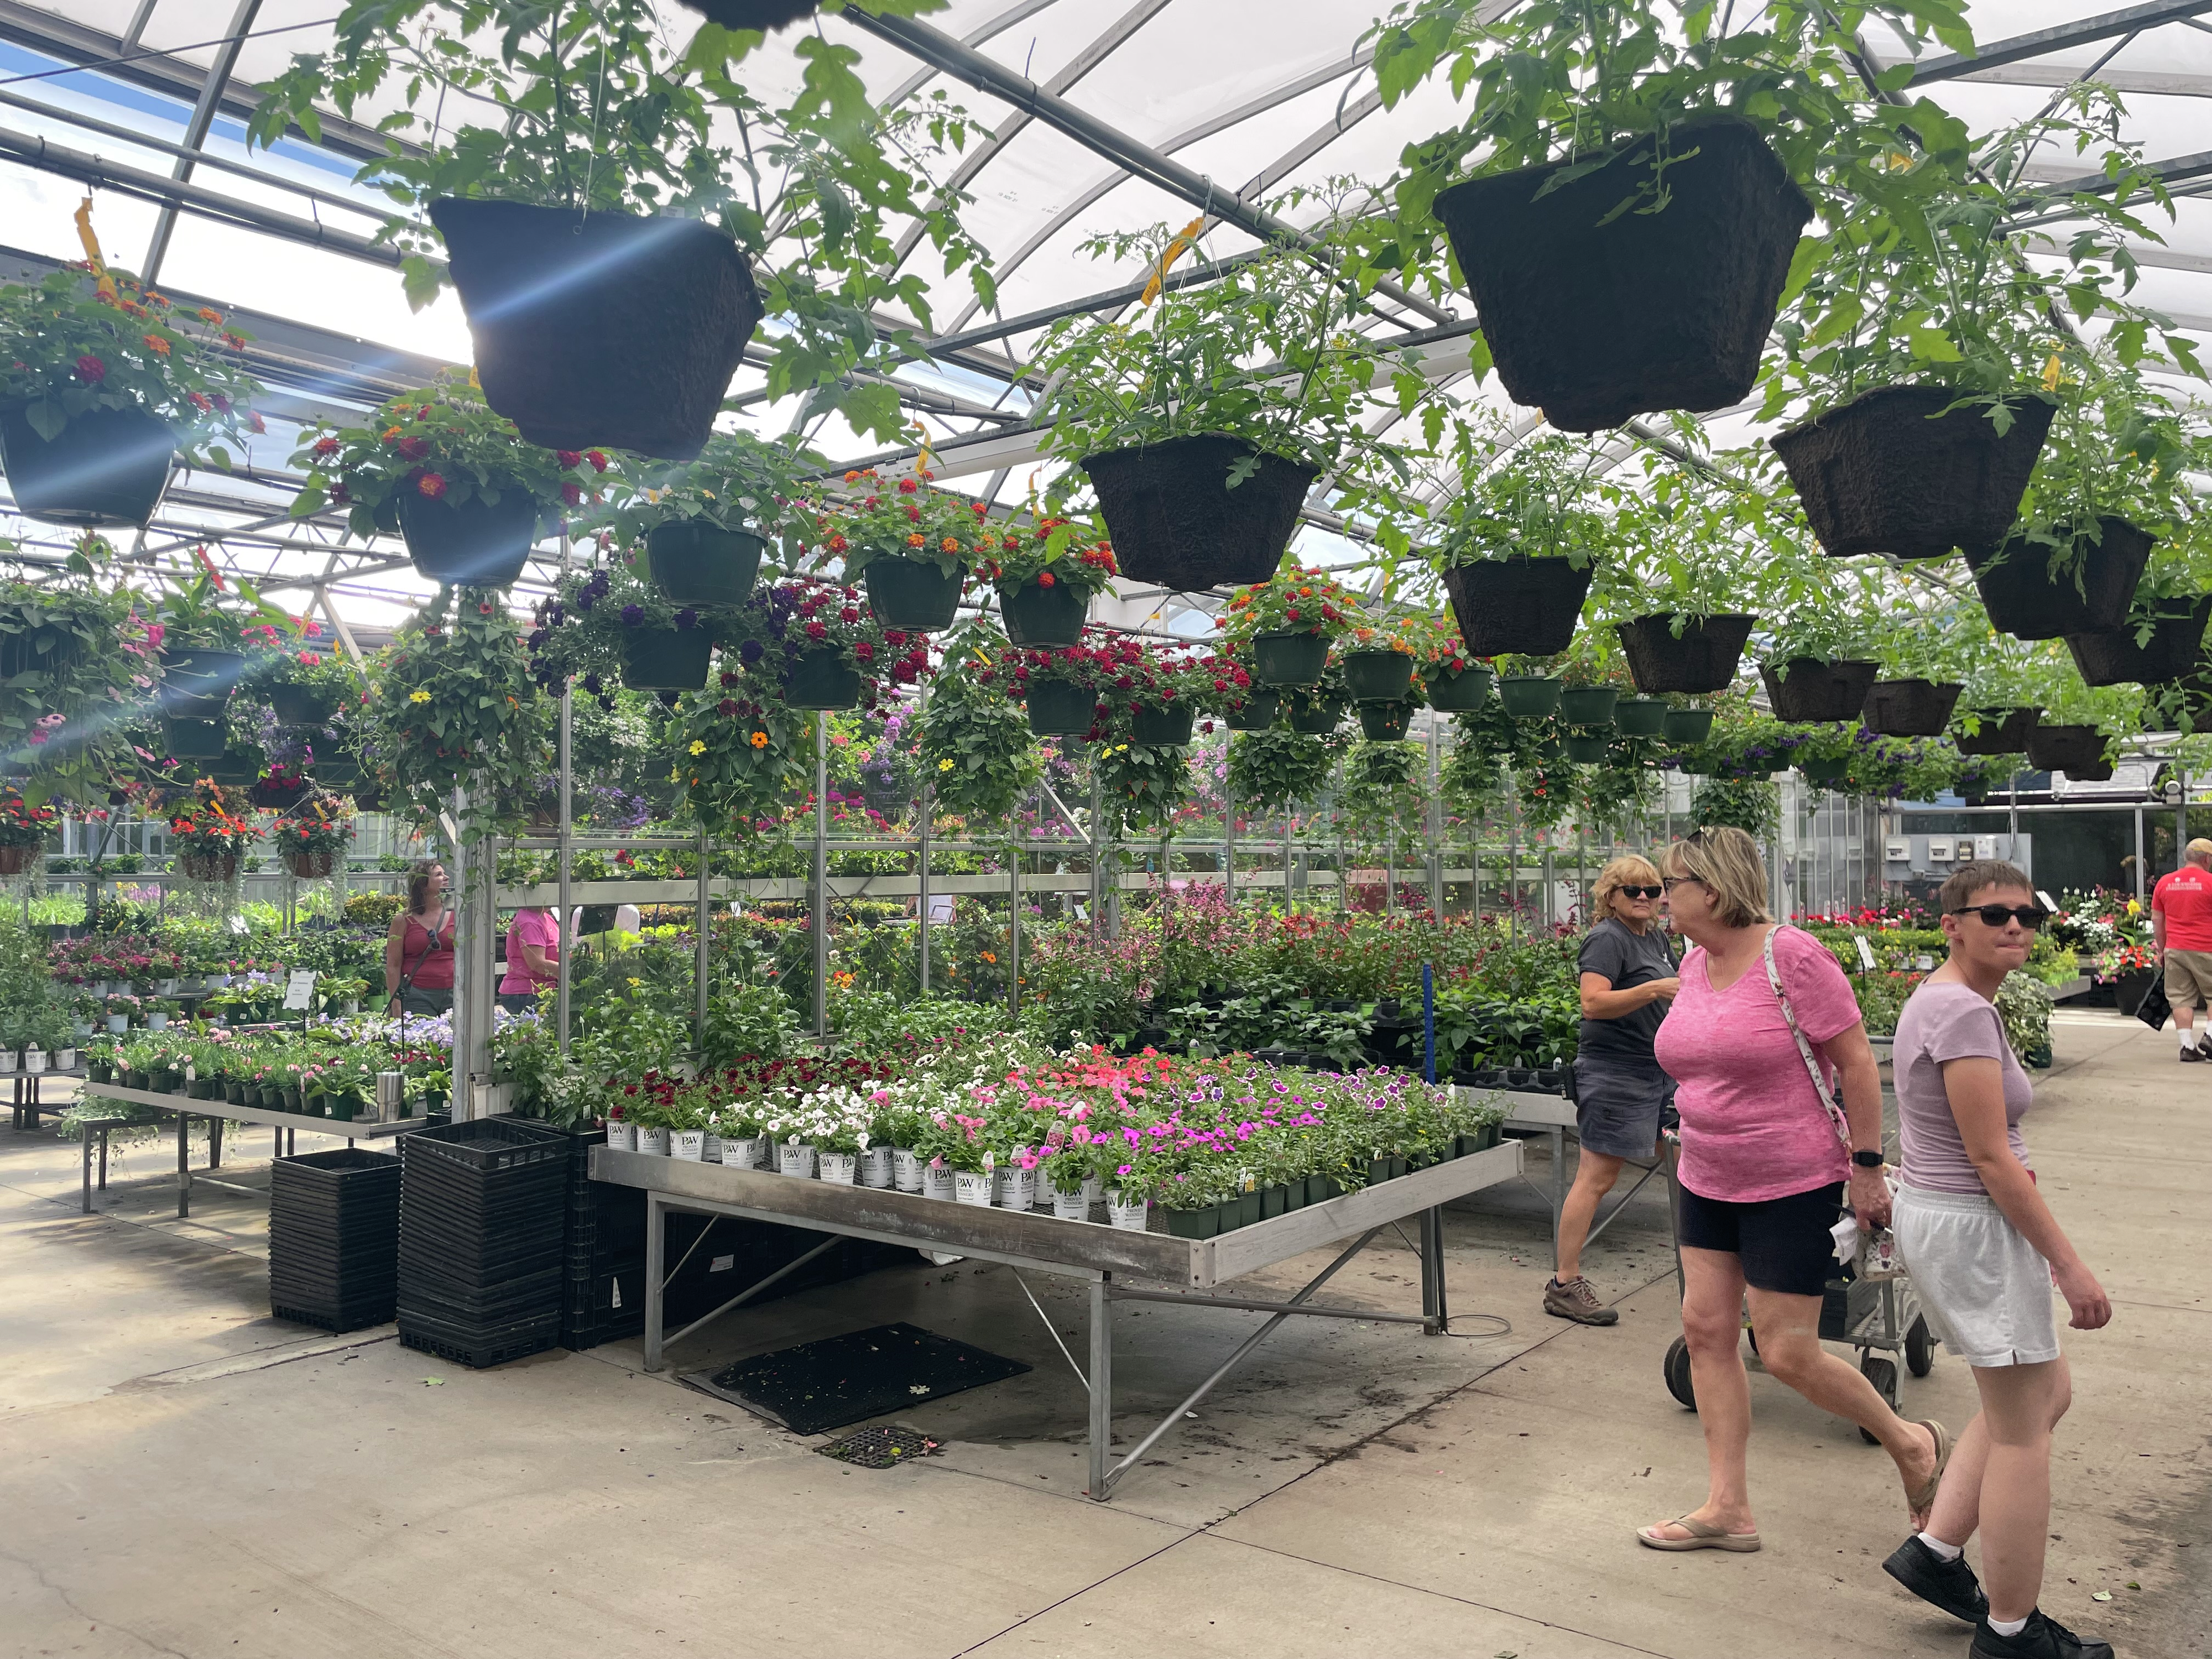 Business manager at Lockwood's Greenhouses & Farm in Hamburg, Marcia Totaro on a busy Memorial Day Weekend ahead at their Garden Center